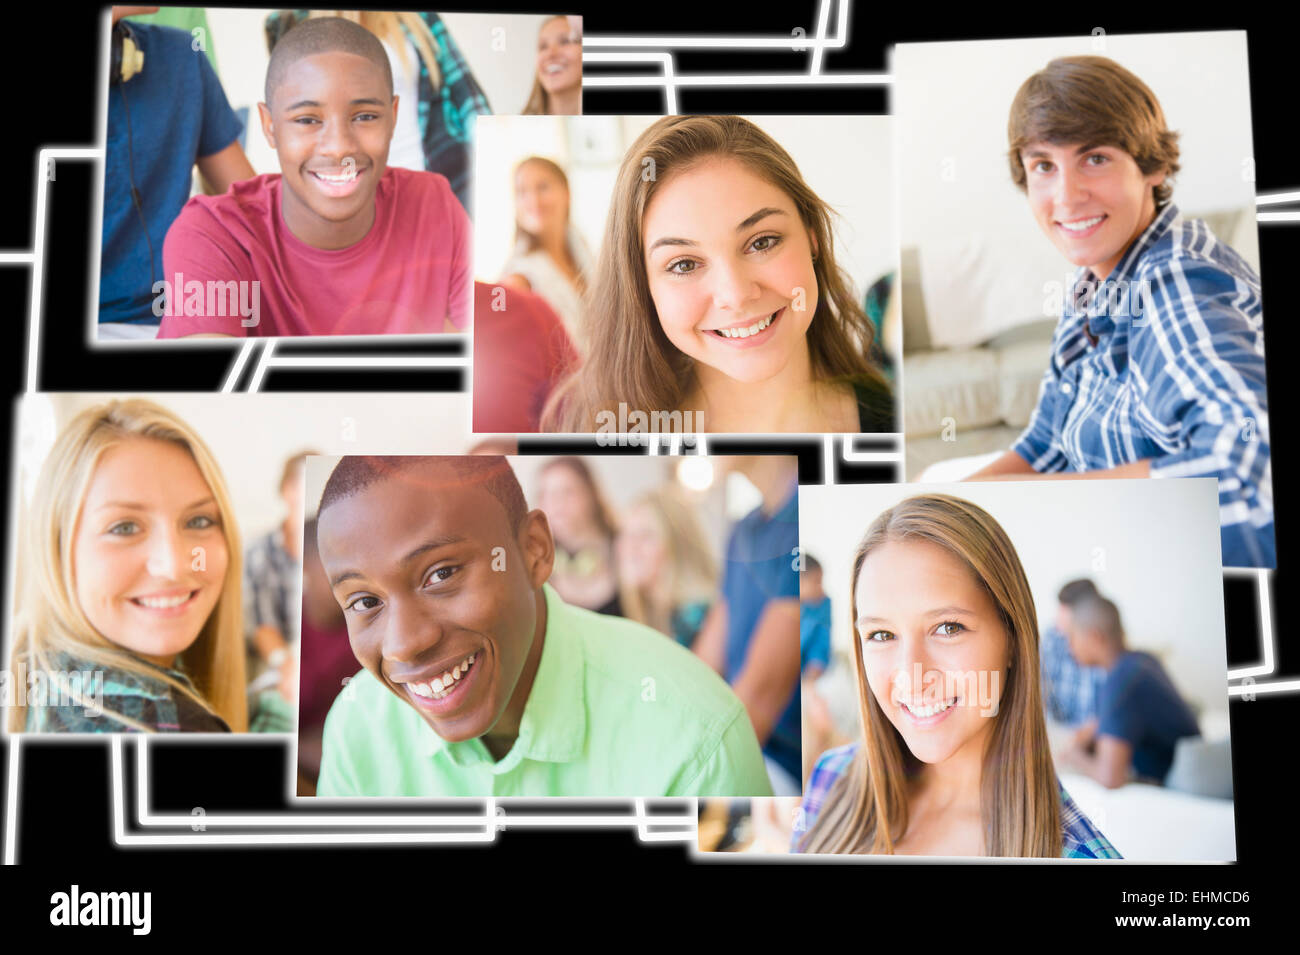 Collage of smiling faces of teenagers Stock Photo